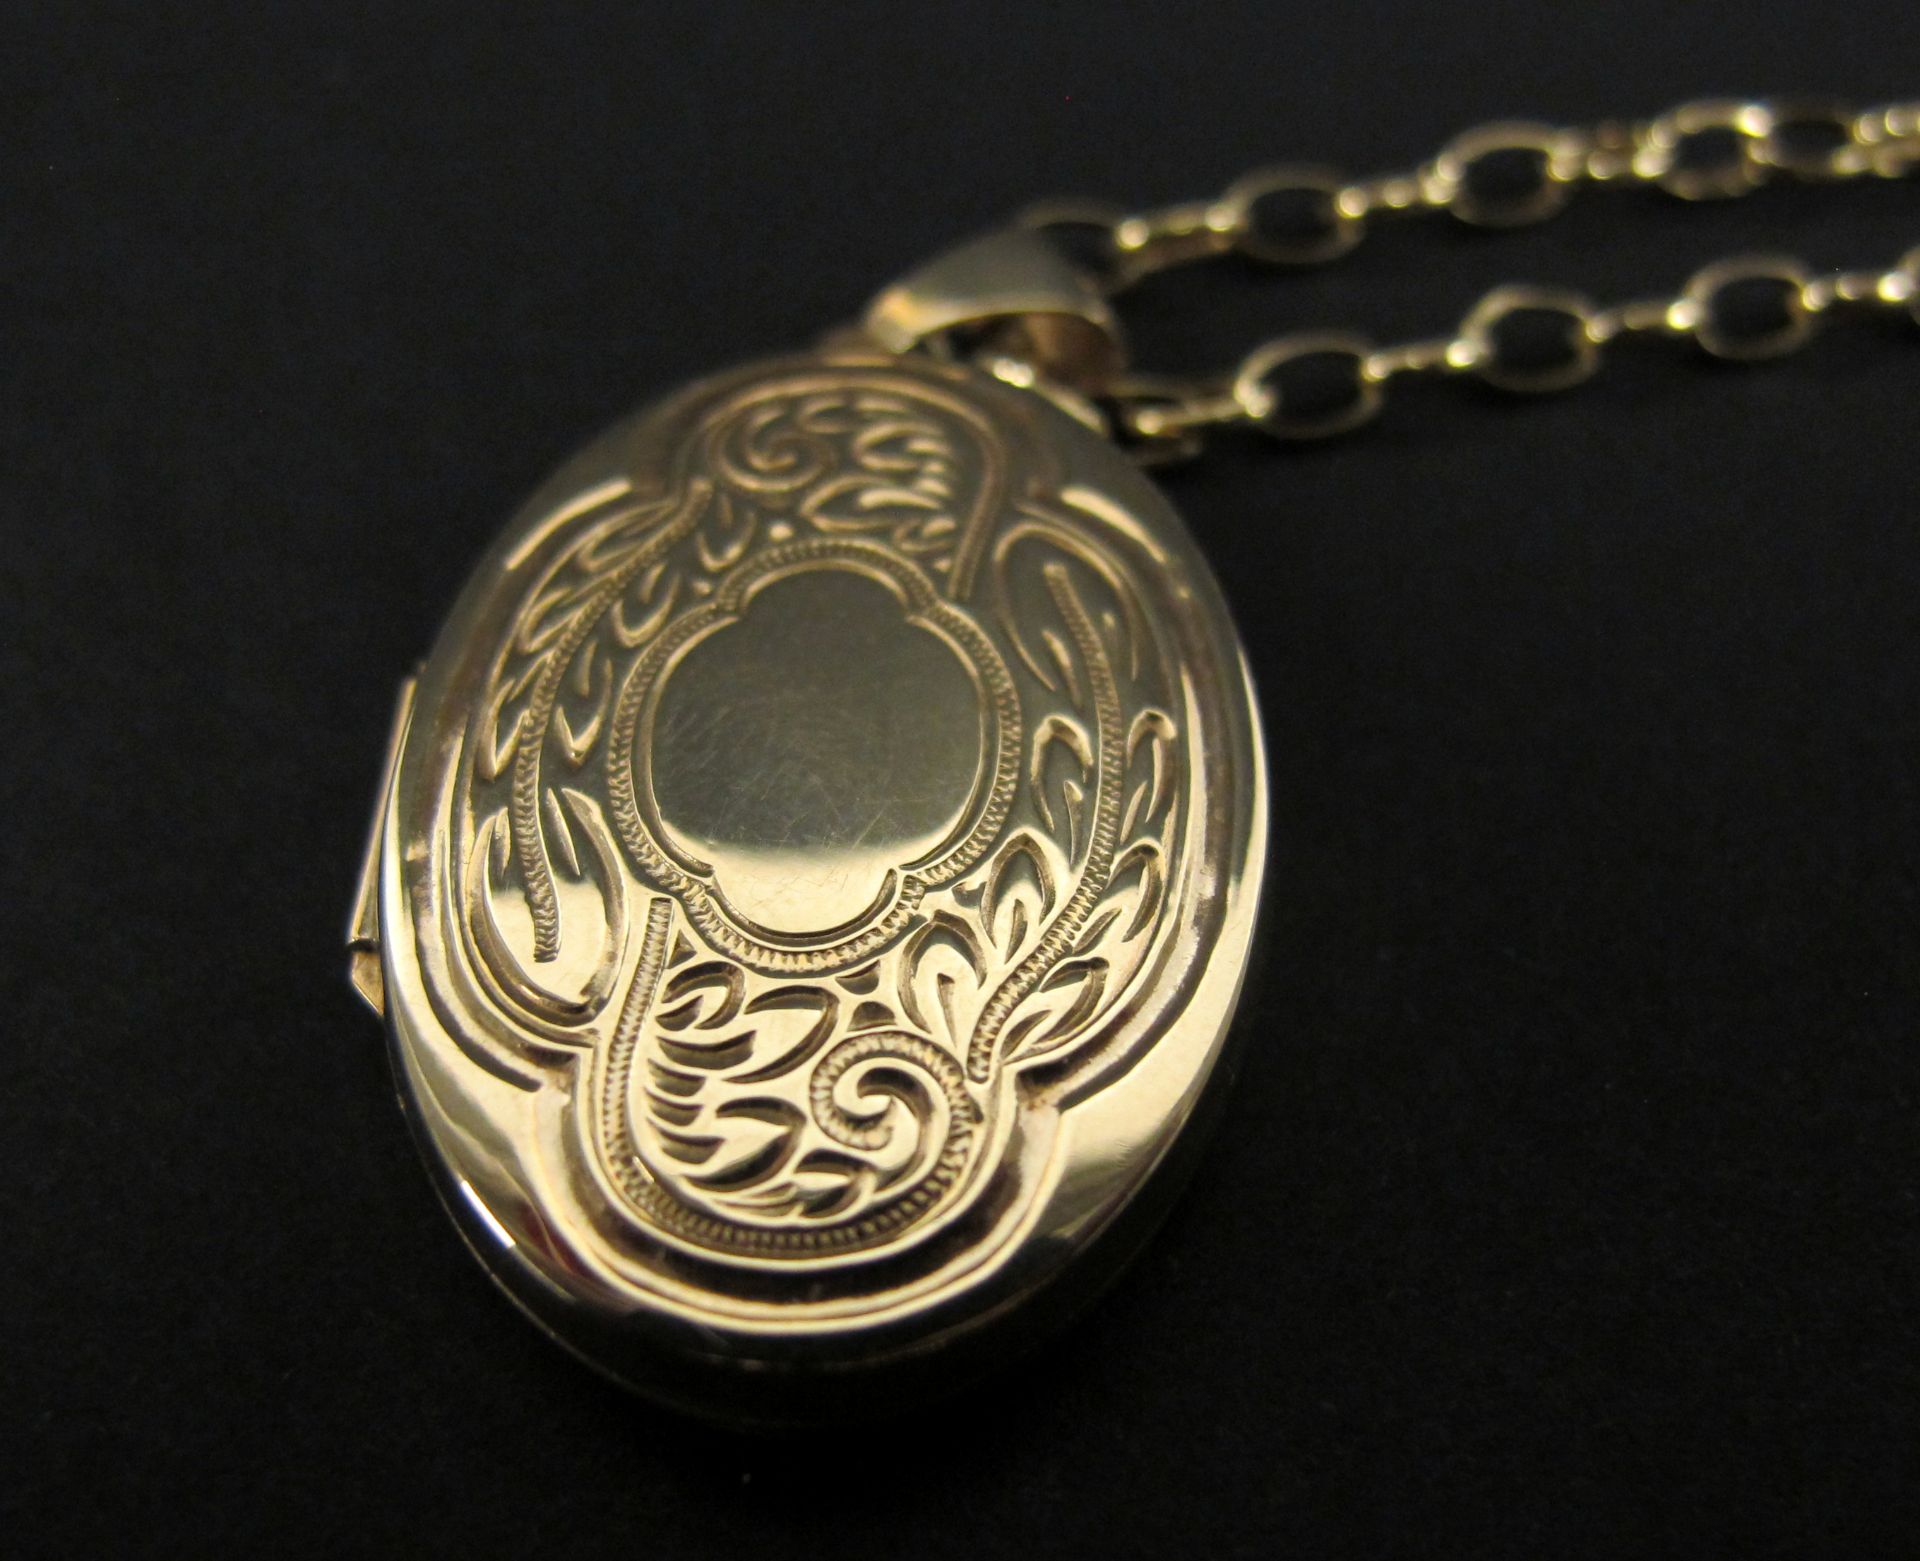 9ct gold locket on 9ct gold chain (approx. 5g) (est £80-£120) - Image 2 of 3